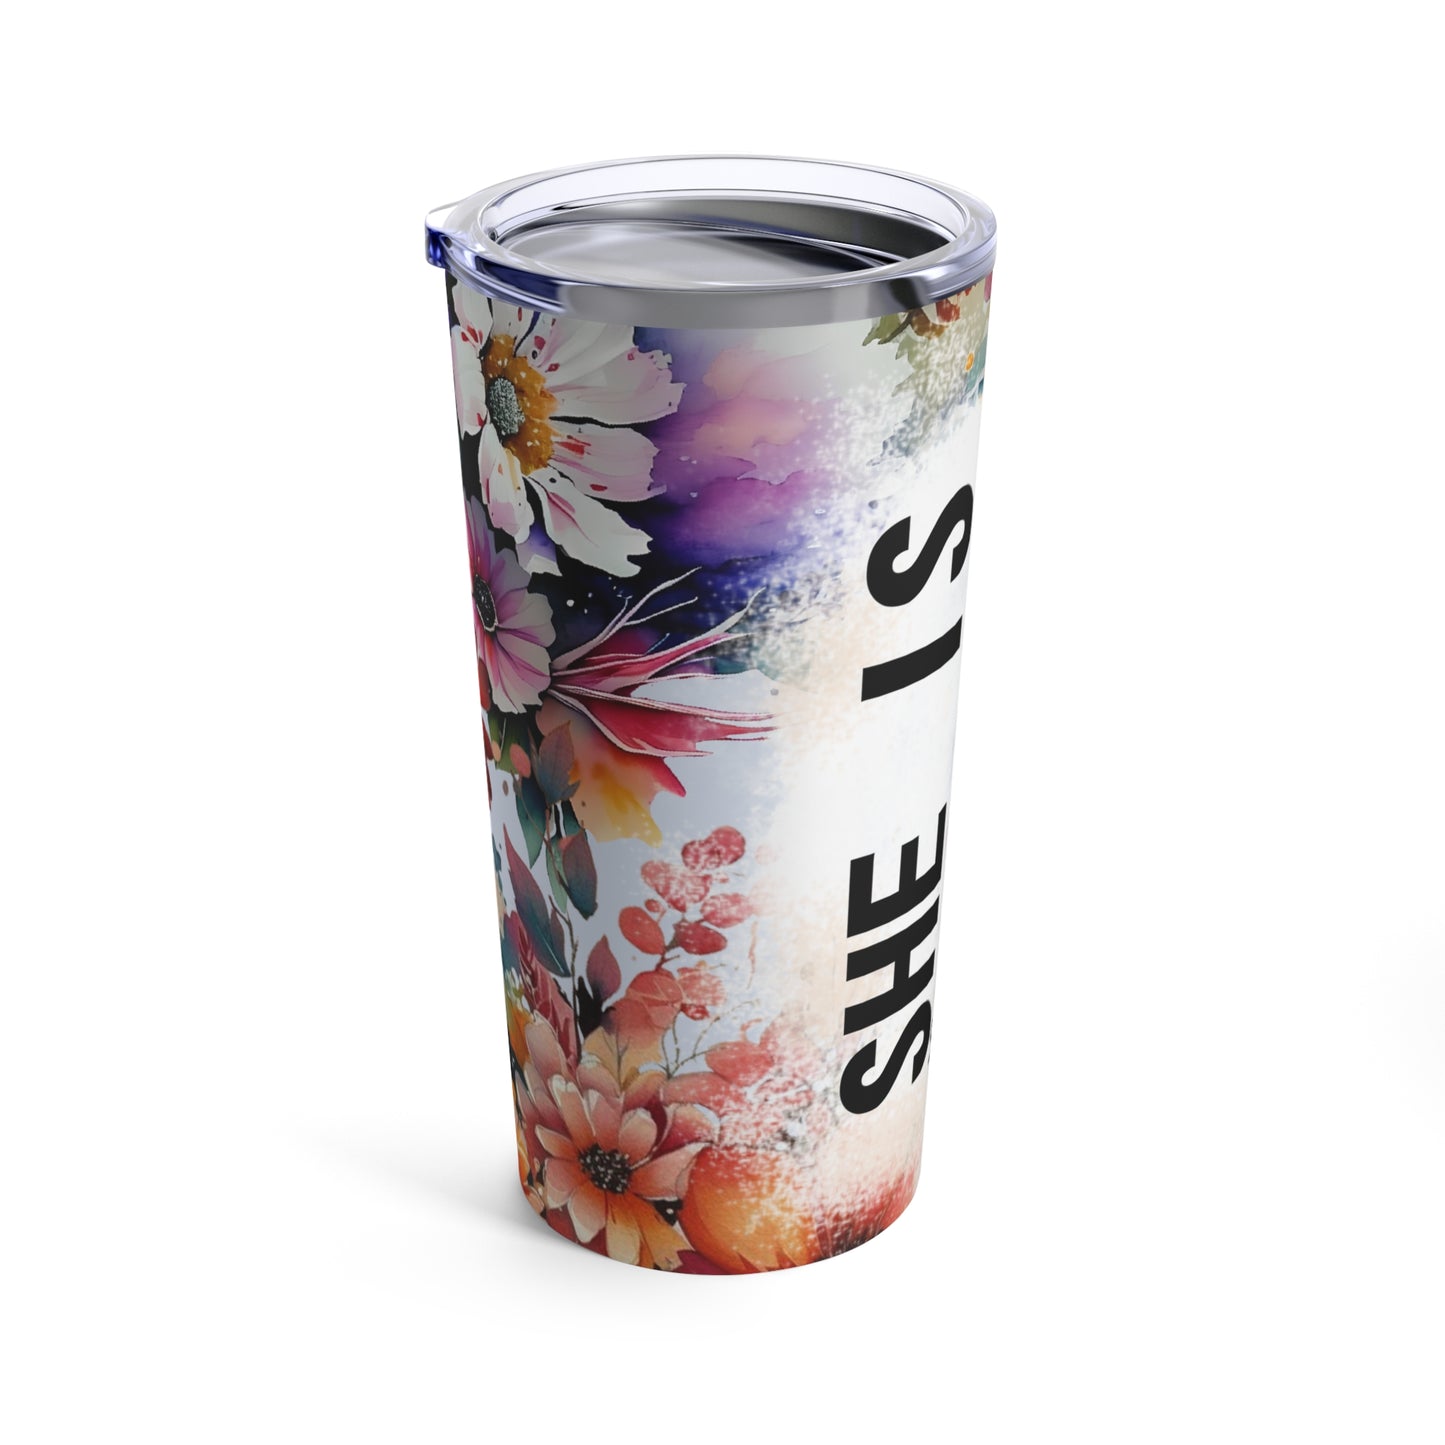 She is design #1, Mother's Day Gift, Wife, Sister, Significant Other, Girlfriend, Grandmother, Gift, Stainless Steel Tumbler 20oz